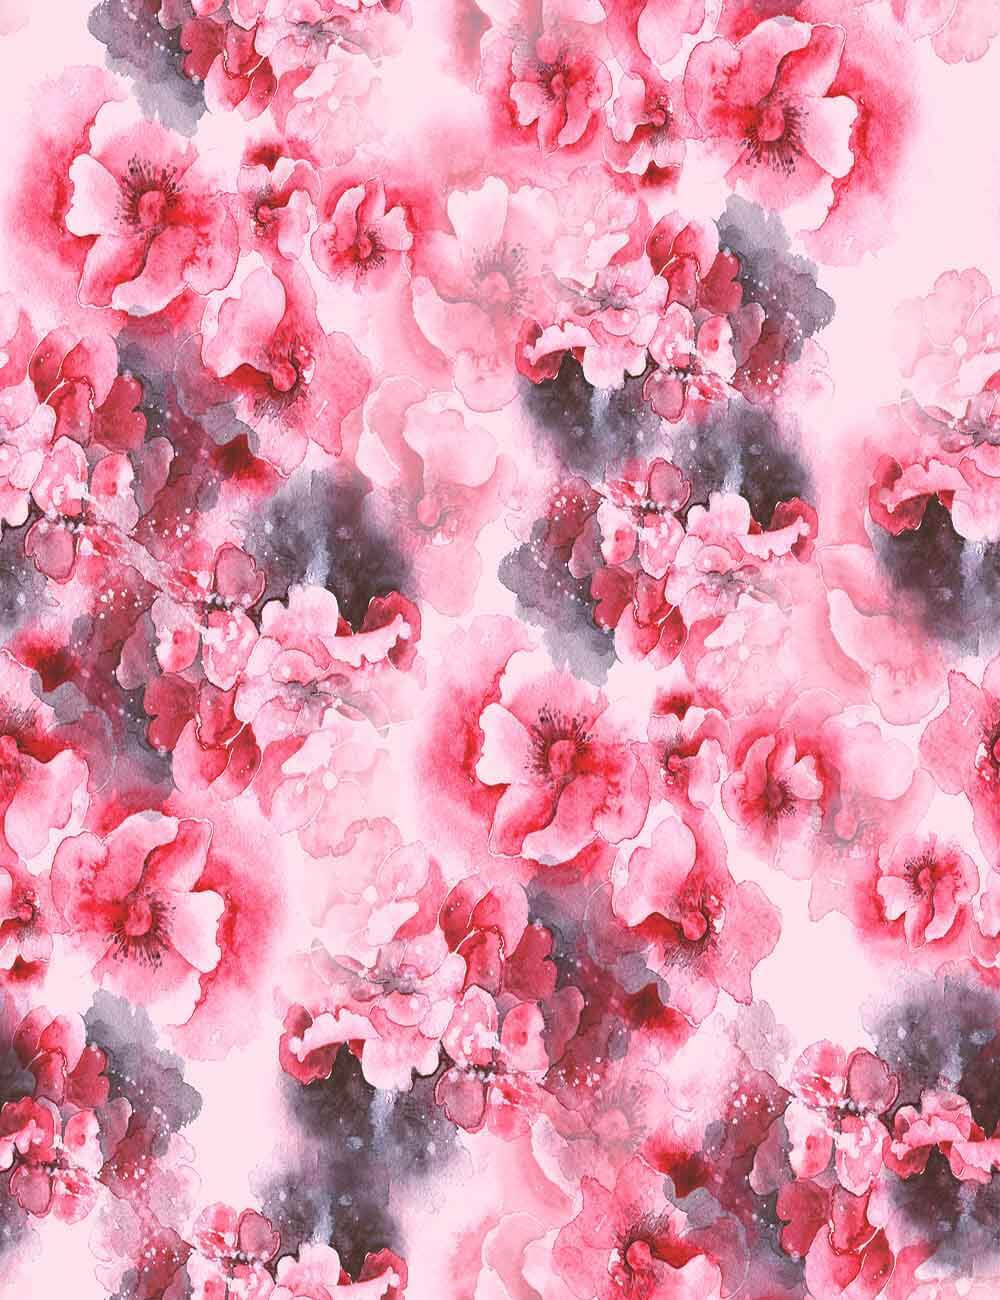 Abstract Hand Painted Watercolor Pink Red Flower Photography Backdrop J-0809 Shopbackdrop